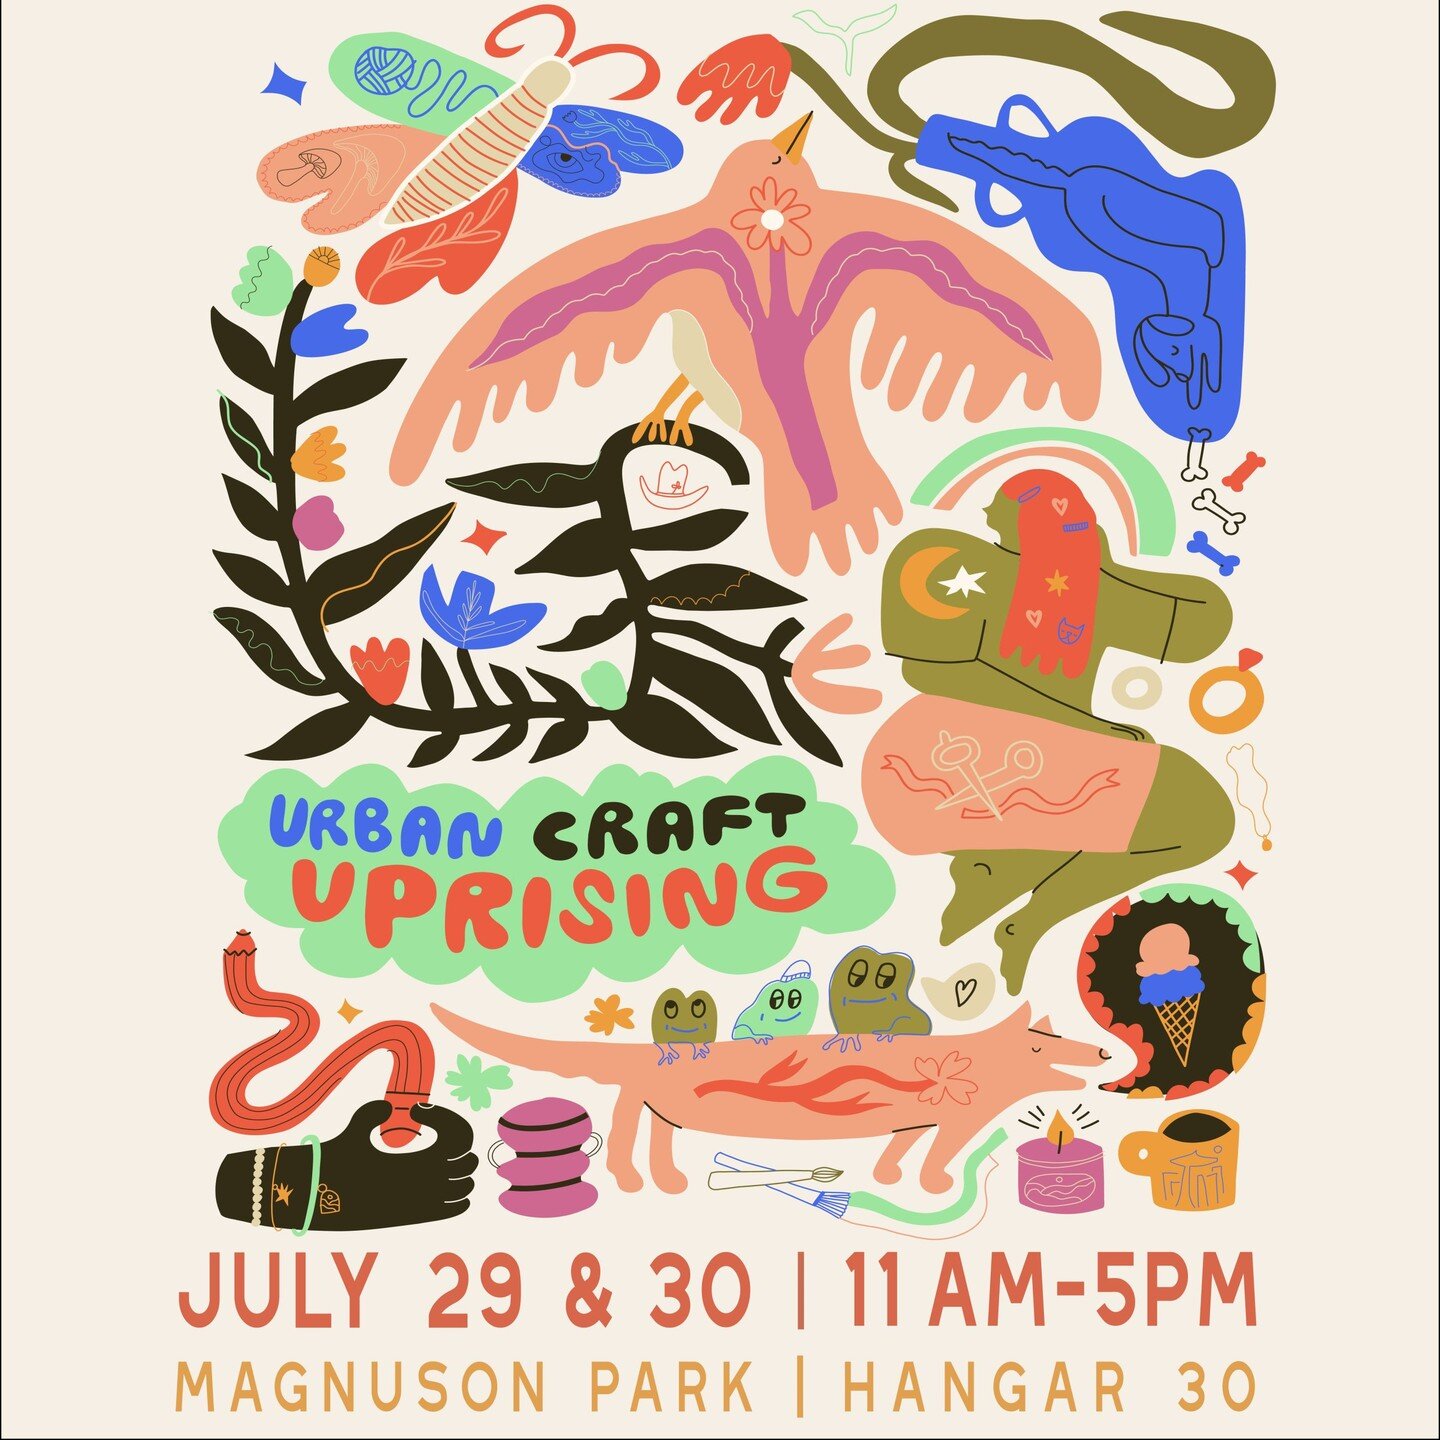 I'm so excited! Fossick will be at the @urbancraftuprising craft fair this weekend. We'll be at Magnuson Park in Hangar 30 on Saturday and Sunday from 11am - 5pm with 140 other fantastic PNW artists. 

Please come along and say hello, as well as supp